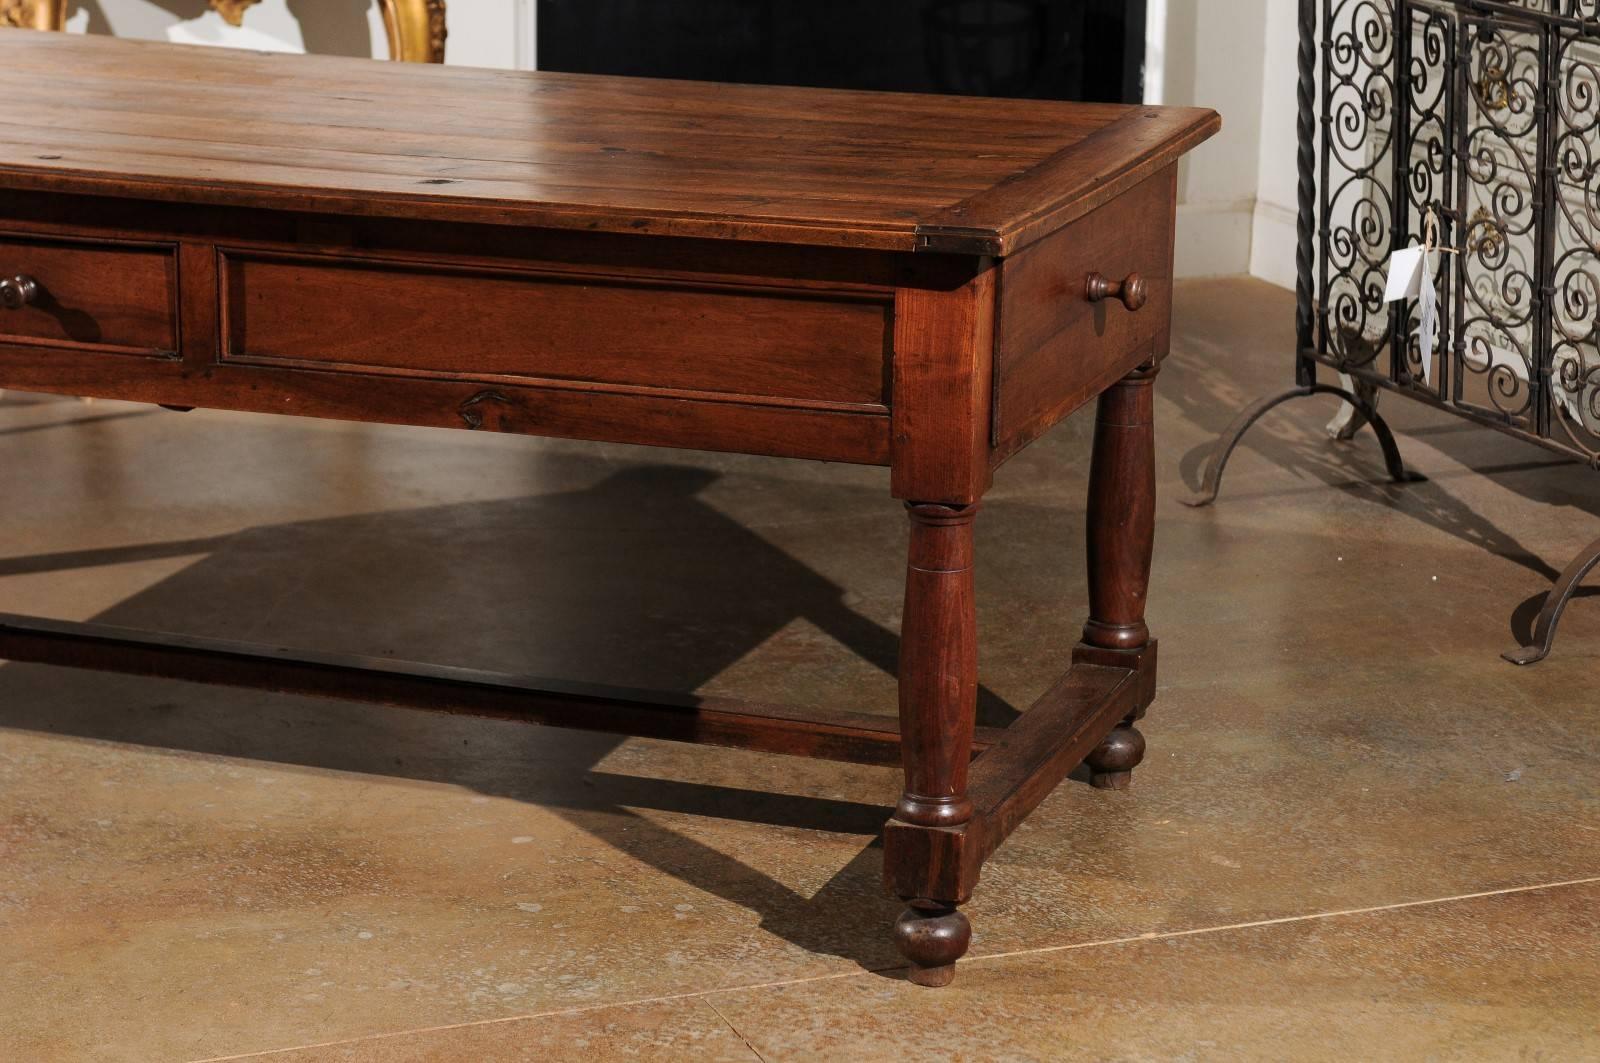 Late 18th Century French Walnut and Acacia Wood Sofa Table with Turned Legs In Good Condition For Sale In Atlanta, GA